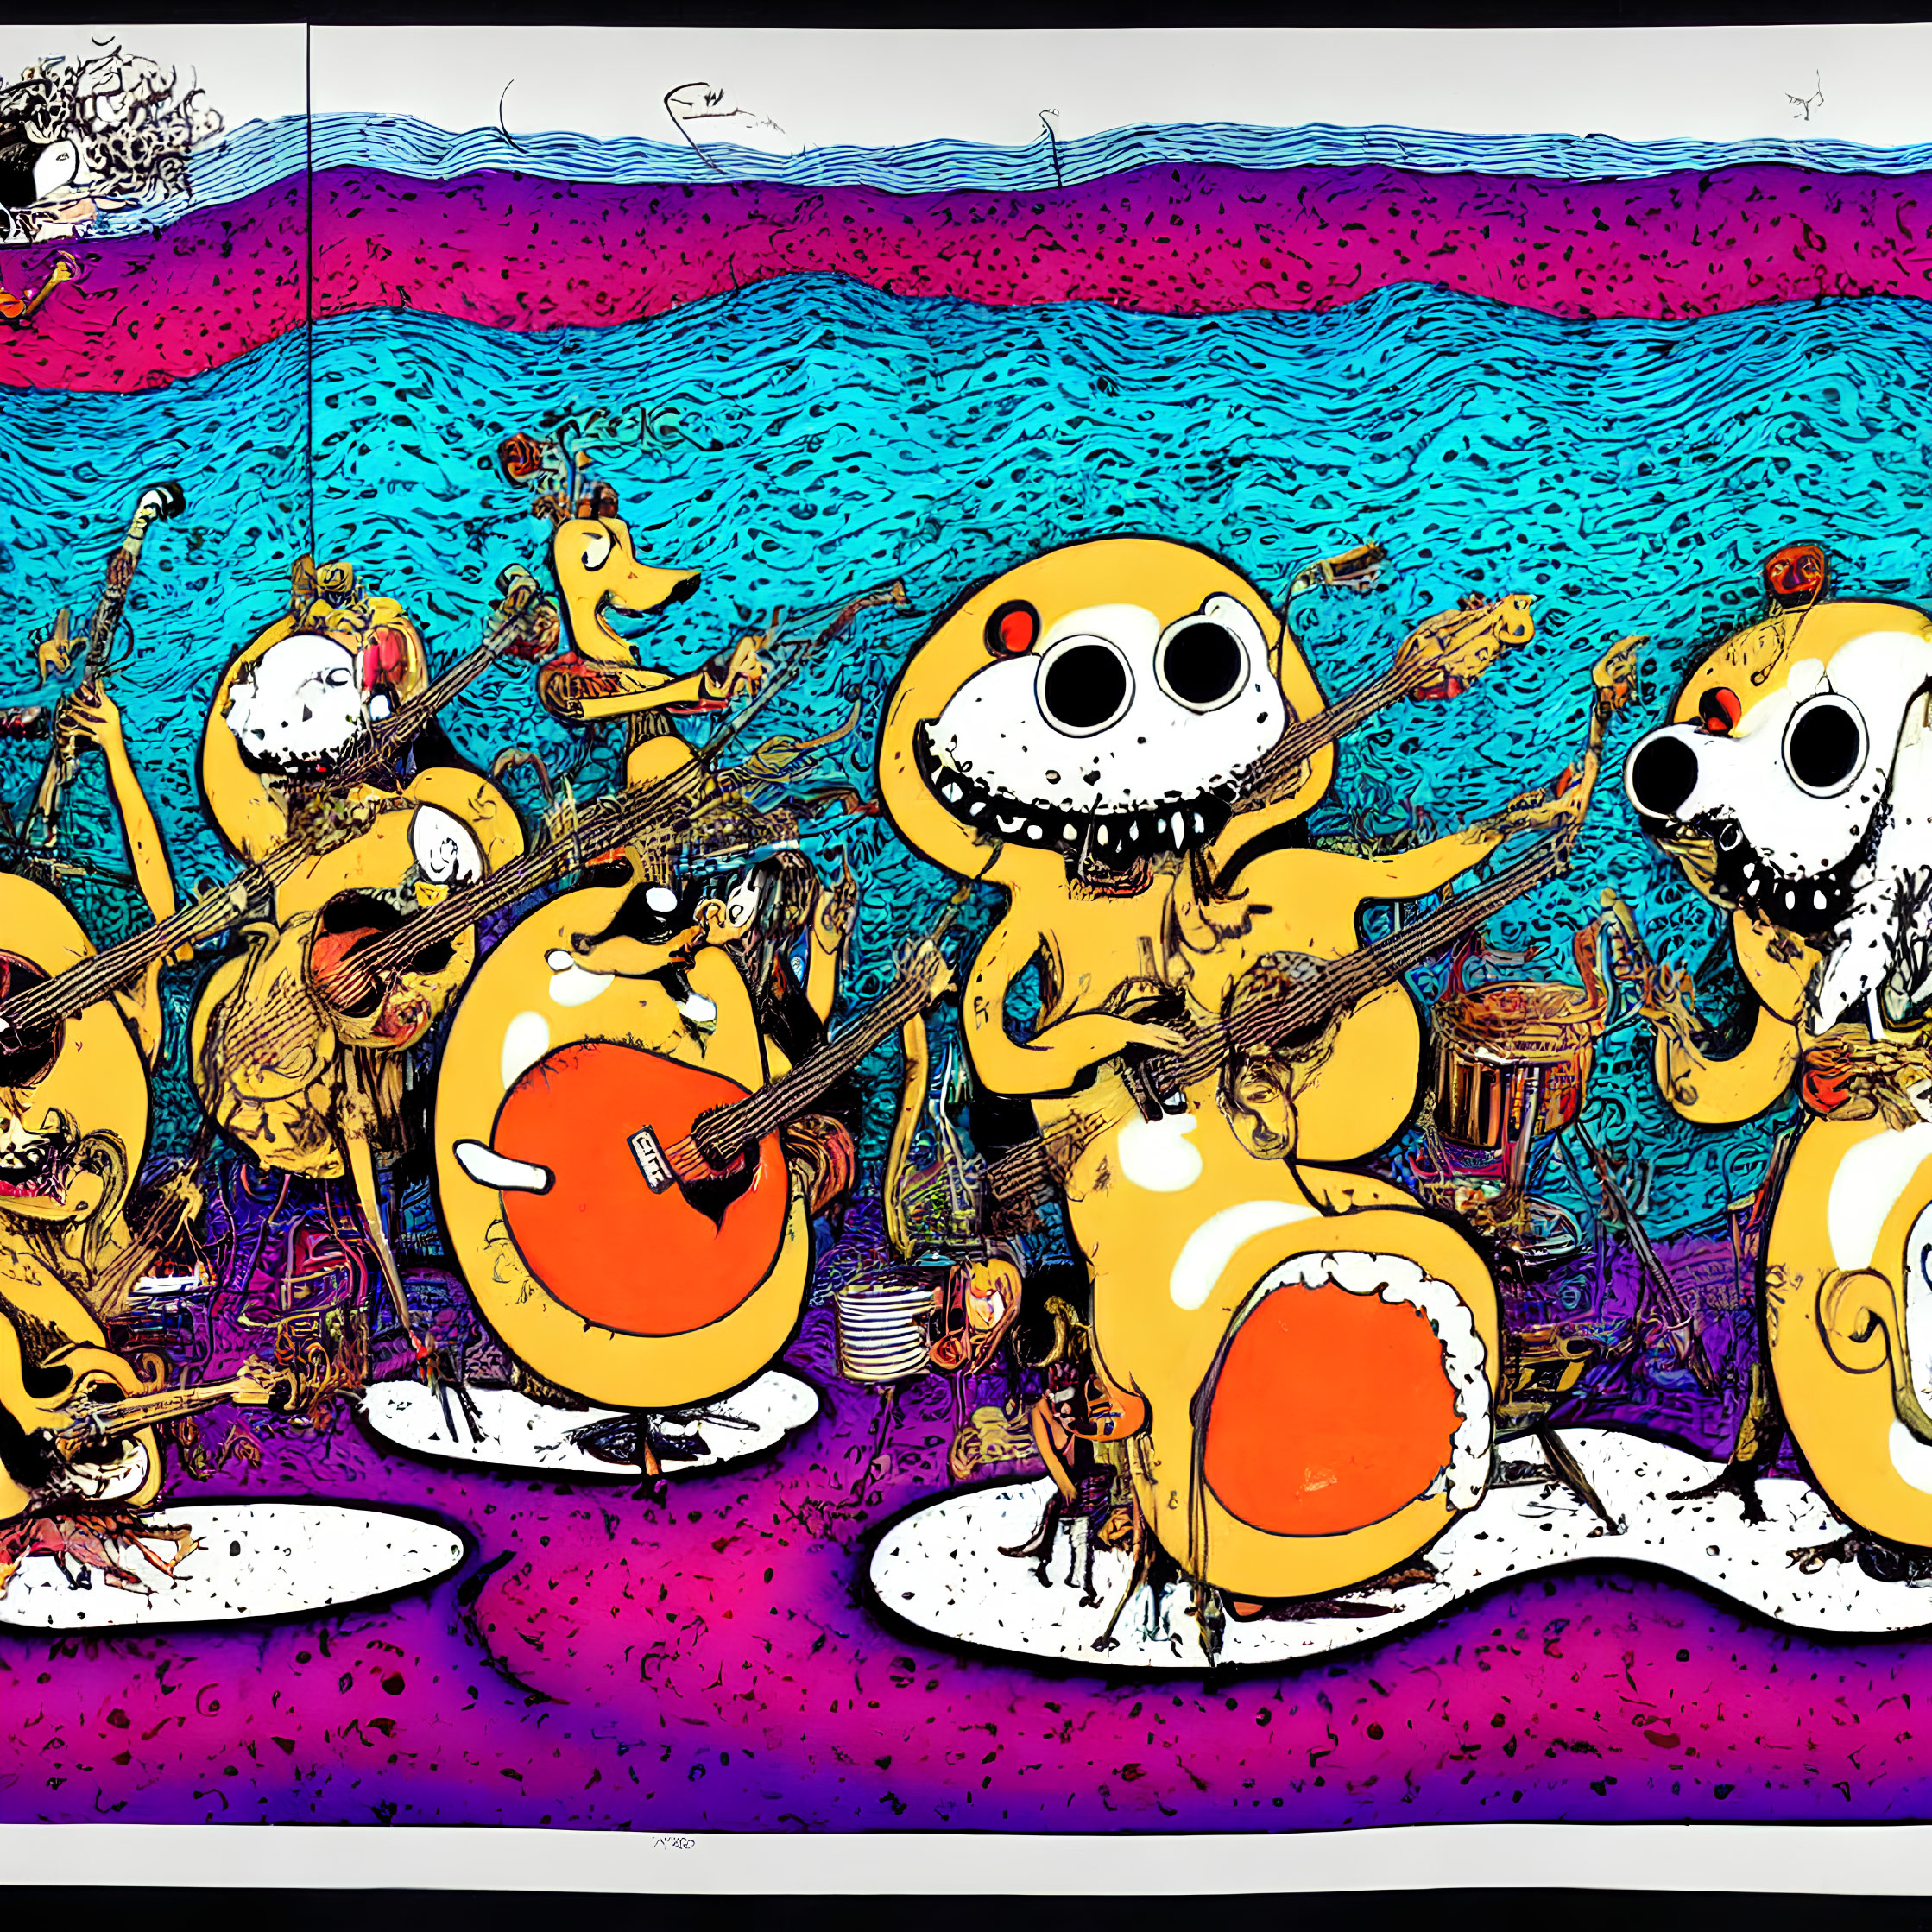 Whimsical yellow creatures playing musical instruments with blue wave